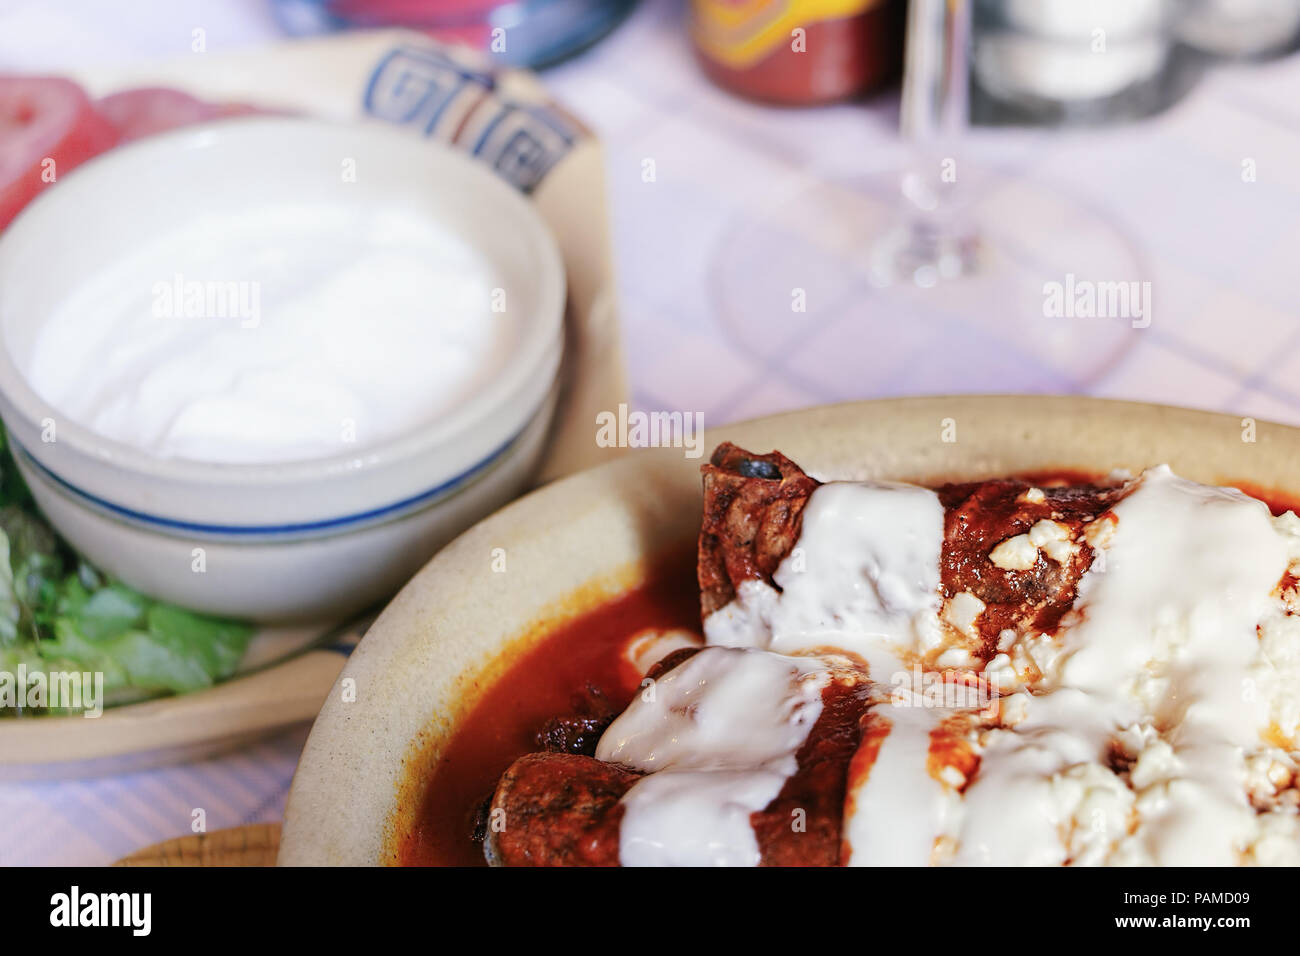 Mexican food or meal in Mexican restaurant, laid table. Stock Photo